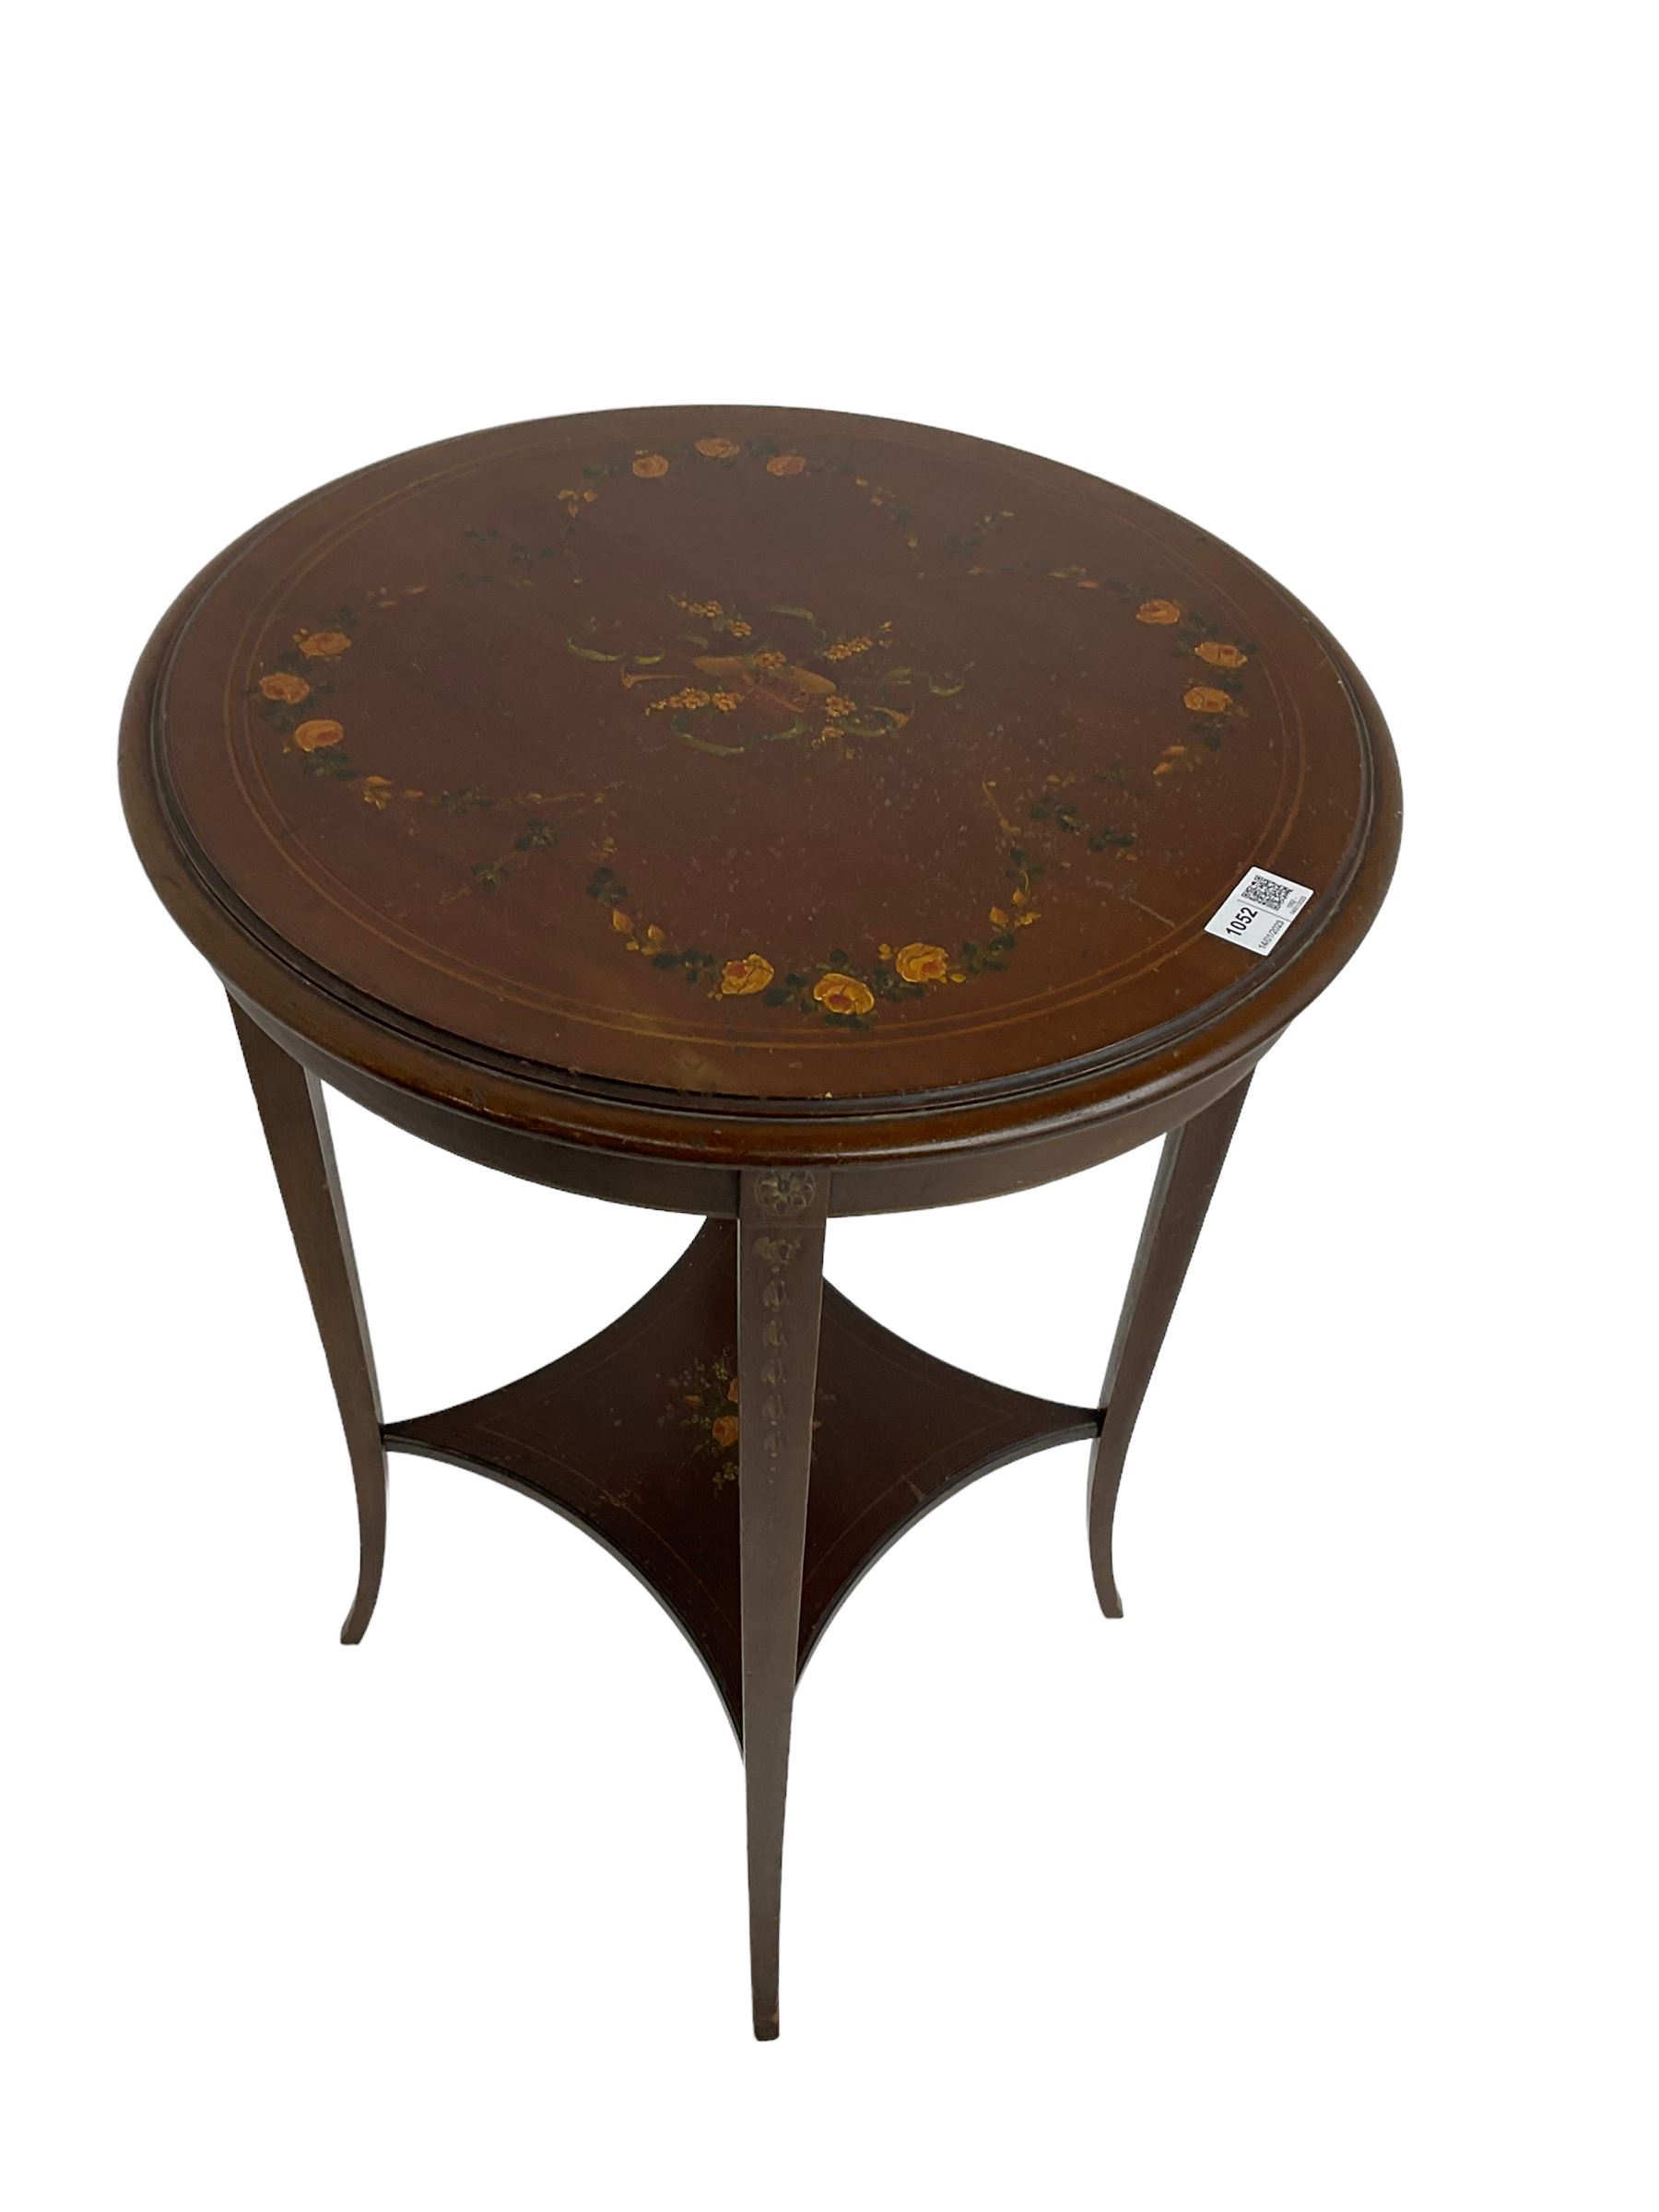 Greenwood and Sons York - early 20th century mahogany side or lamp table - Image 2 of 6